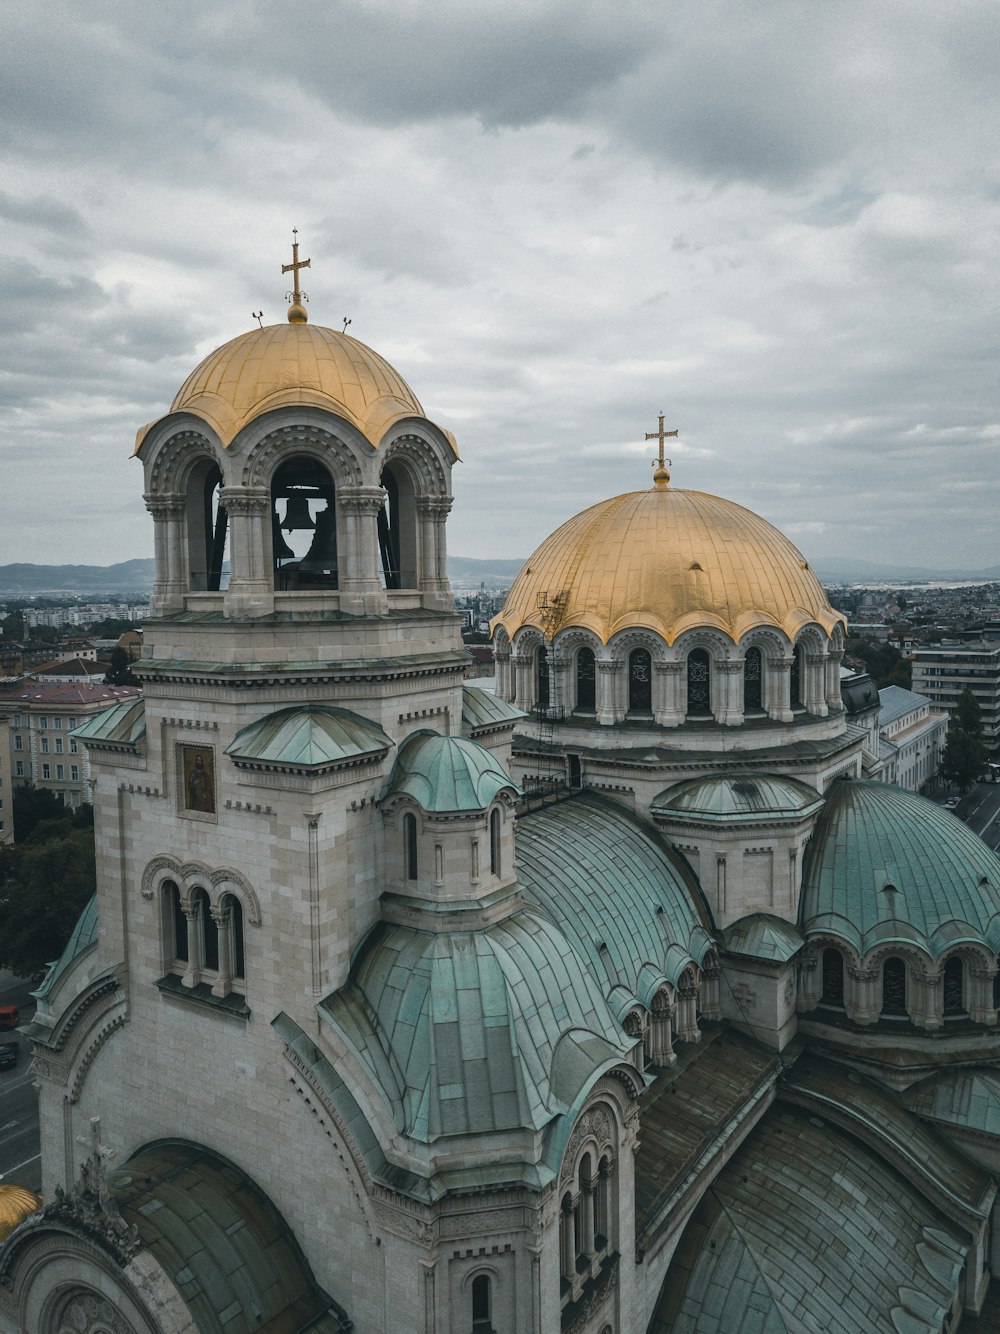 gray stone church with domed roofs